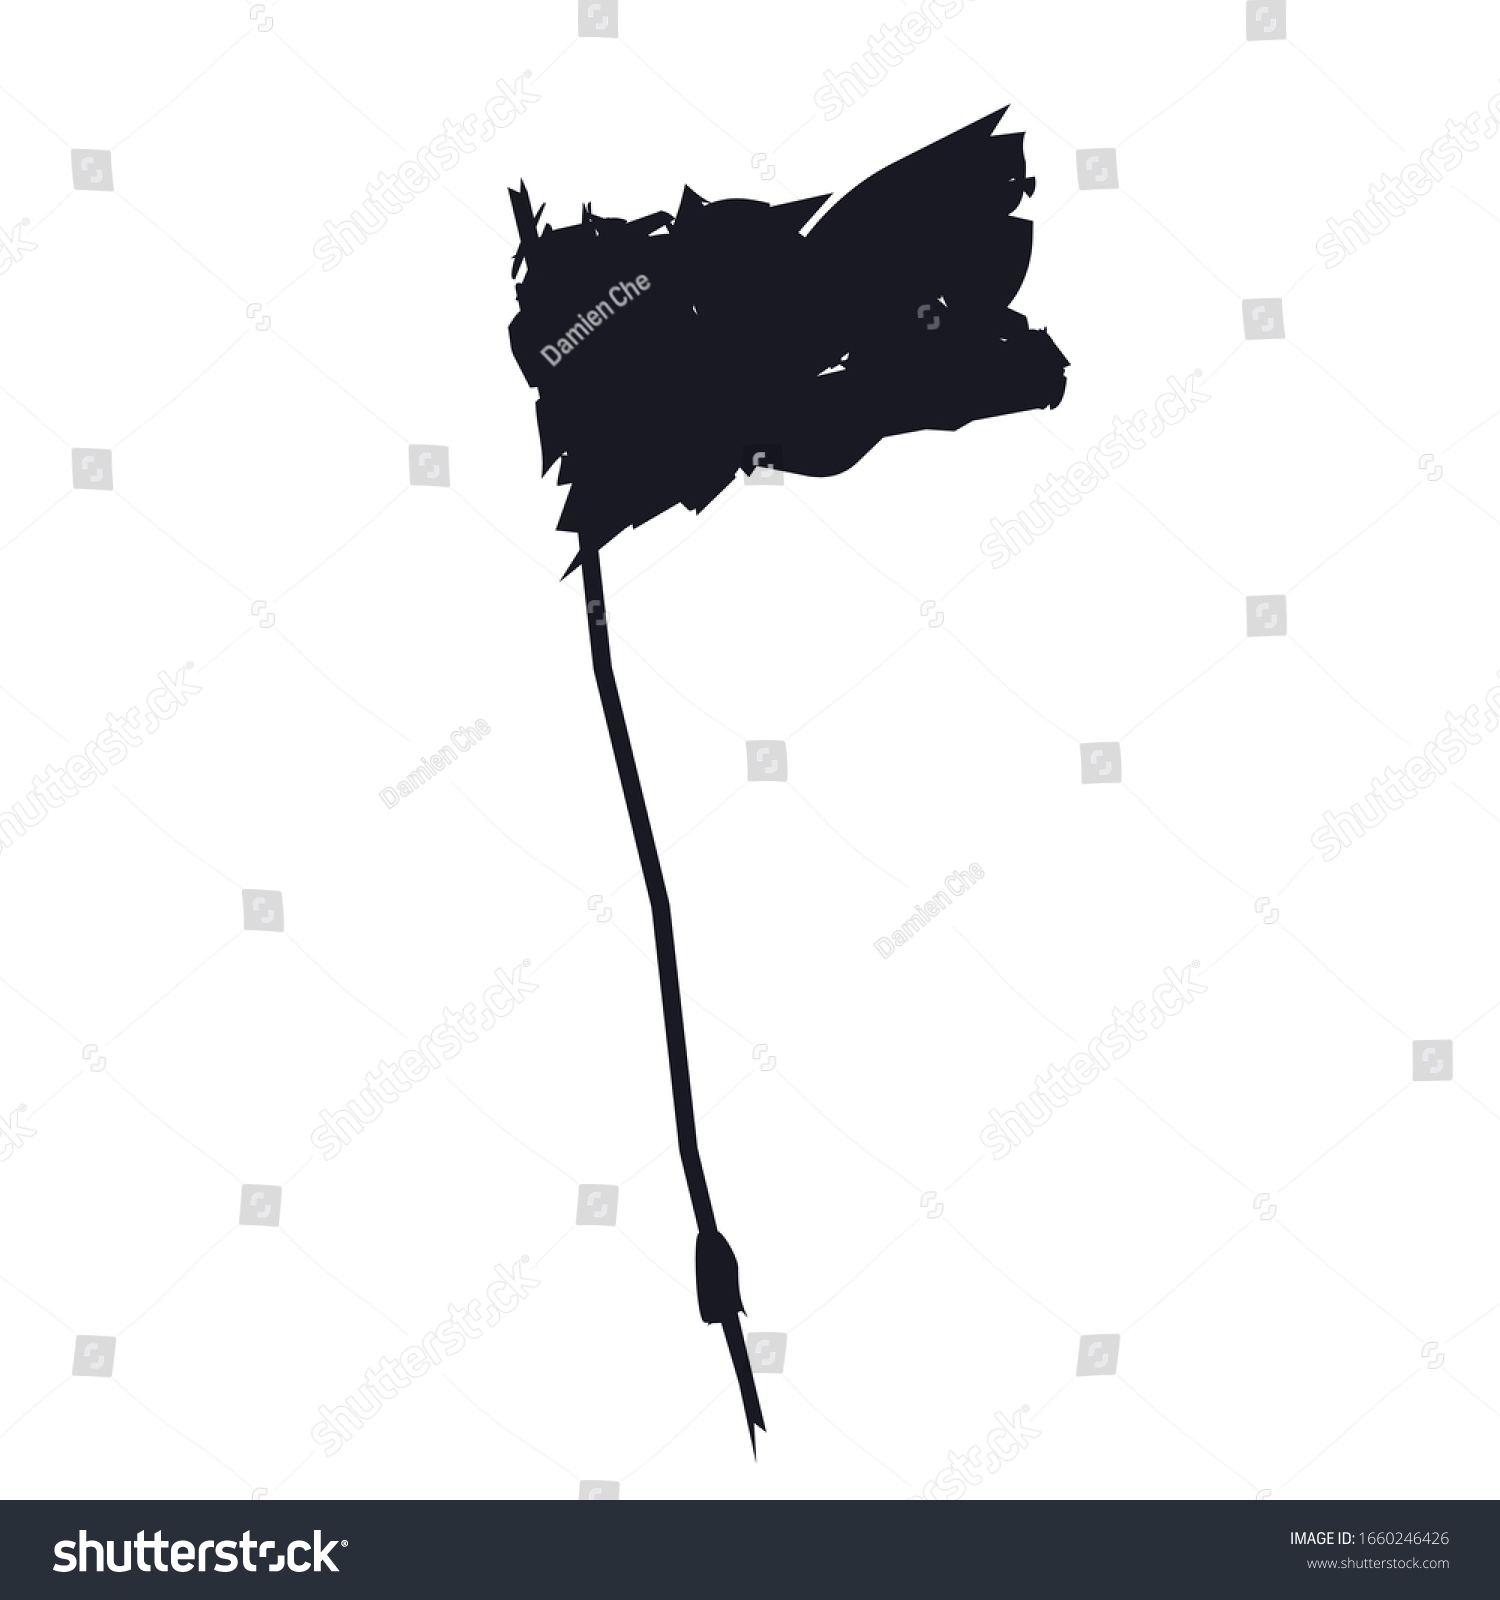 SVG of Tattered flag torn logo sign icon silhouette of waving old ancient flag Modern children's style doodle design Fashion print for clothes cards picture poster banner for websites. Vector illustration svg